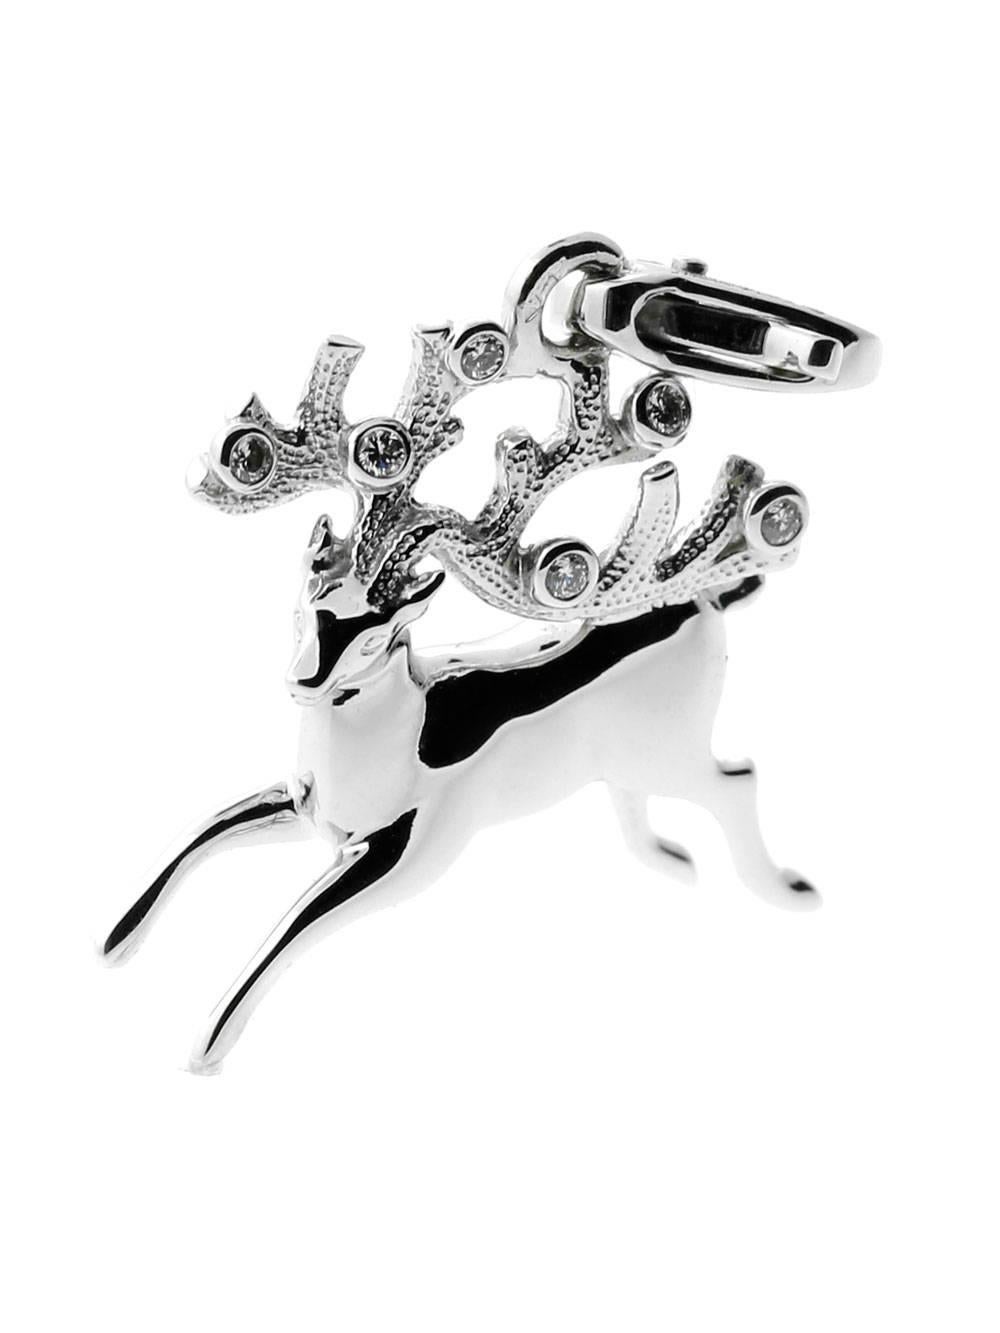 A fabulous authentic Chanel Reindeer 18k white gold charm/pendant encrusted with diamond antlers.

Dimensions: .82″ Inches by 1.18″ Inches in length

Inventory ID: 0000039